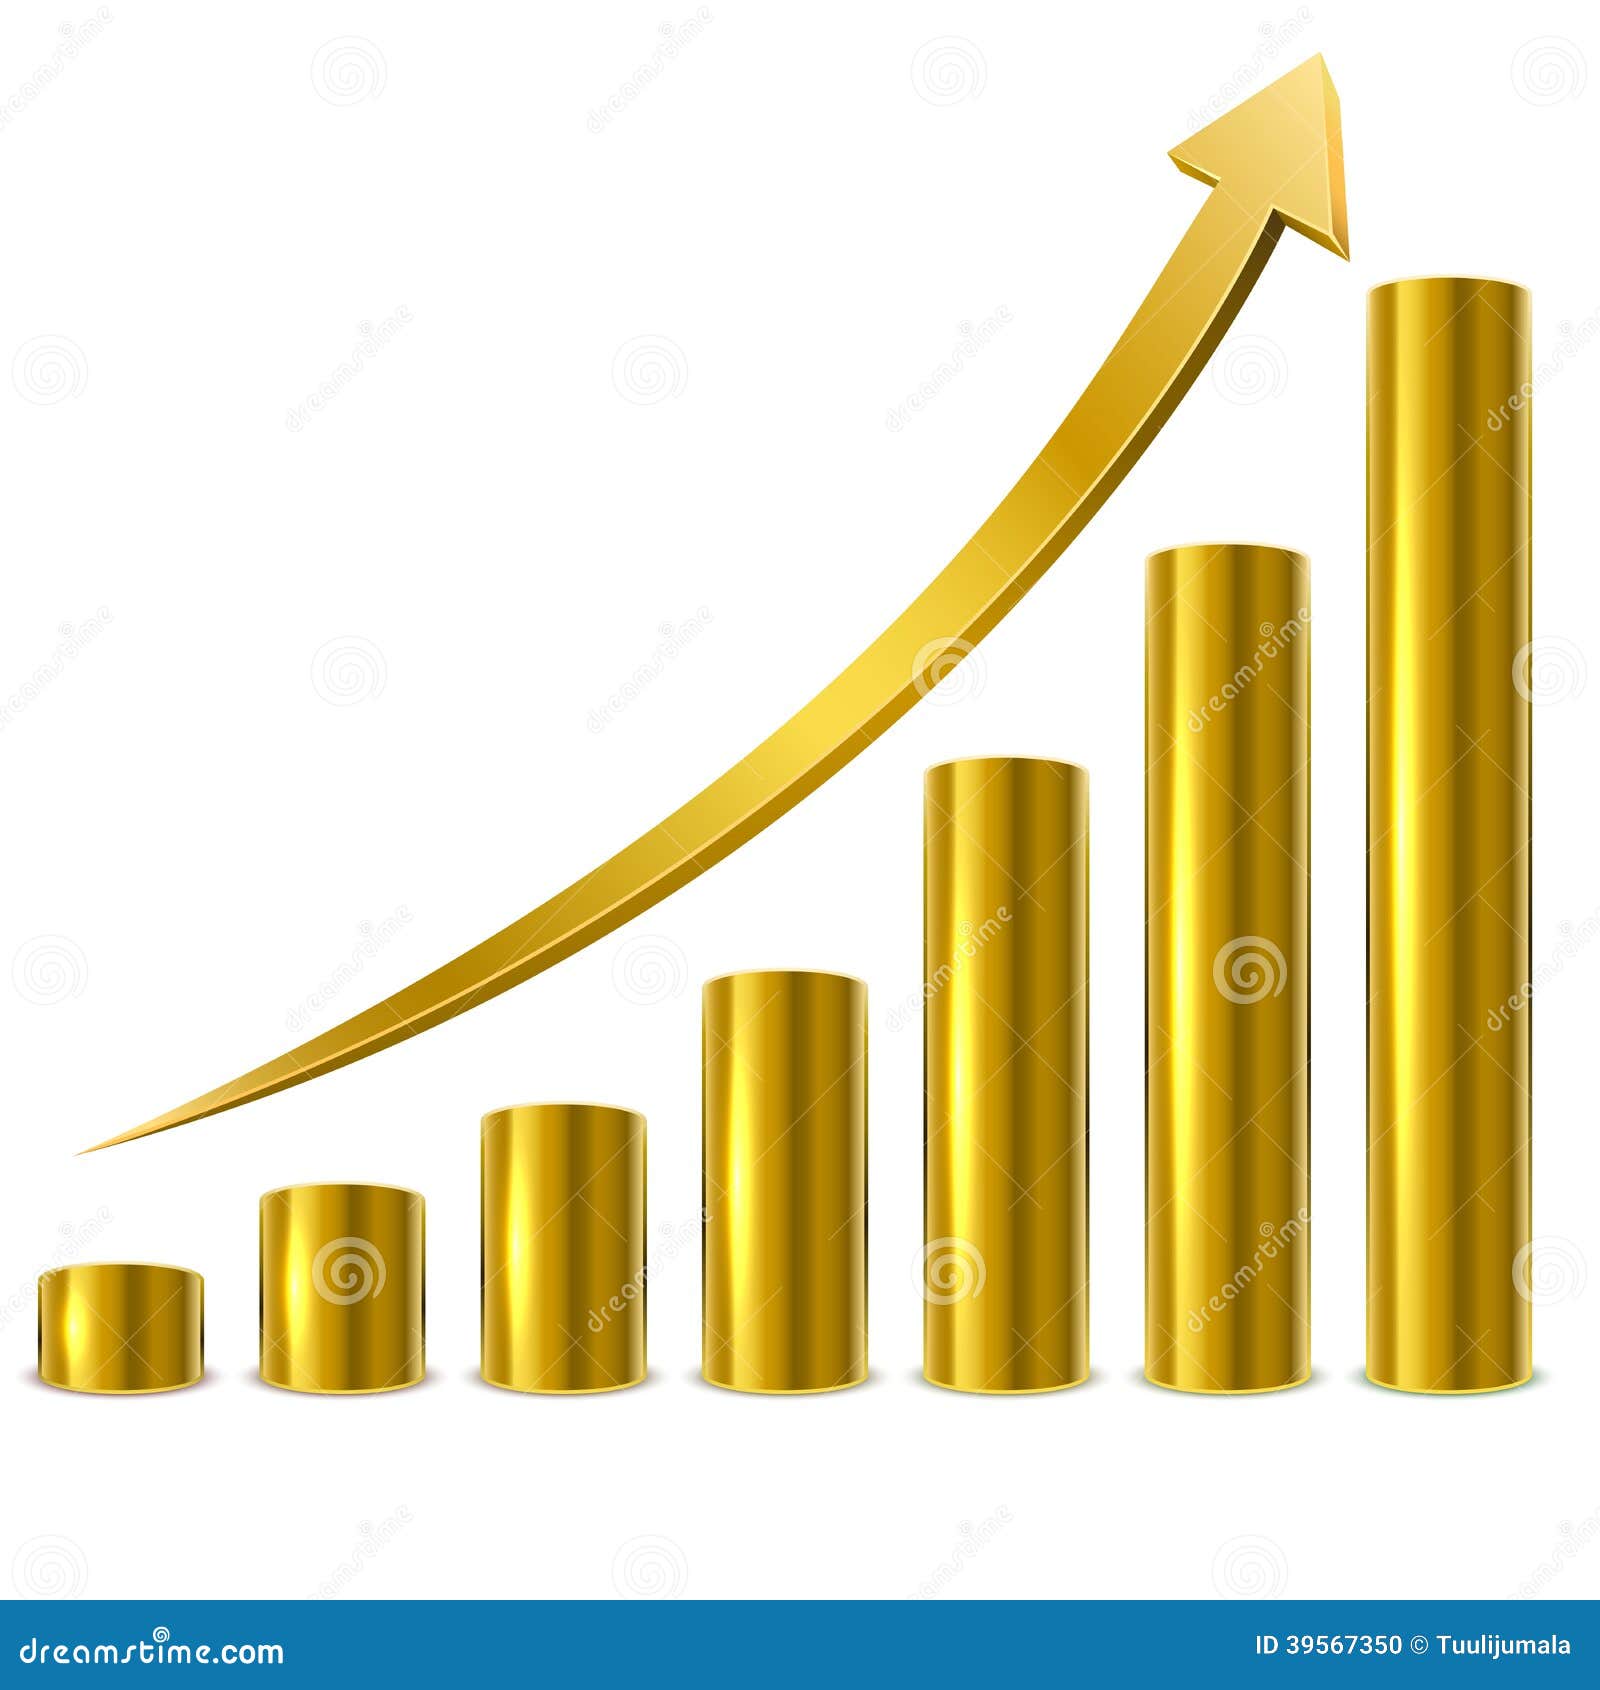 golden-graph-bars-cylinder-glossy-ascending-arrow-template-isolated-white-background-39567350.jpg